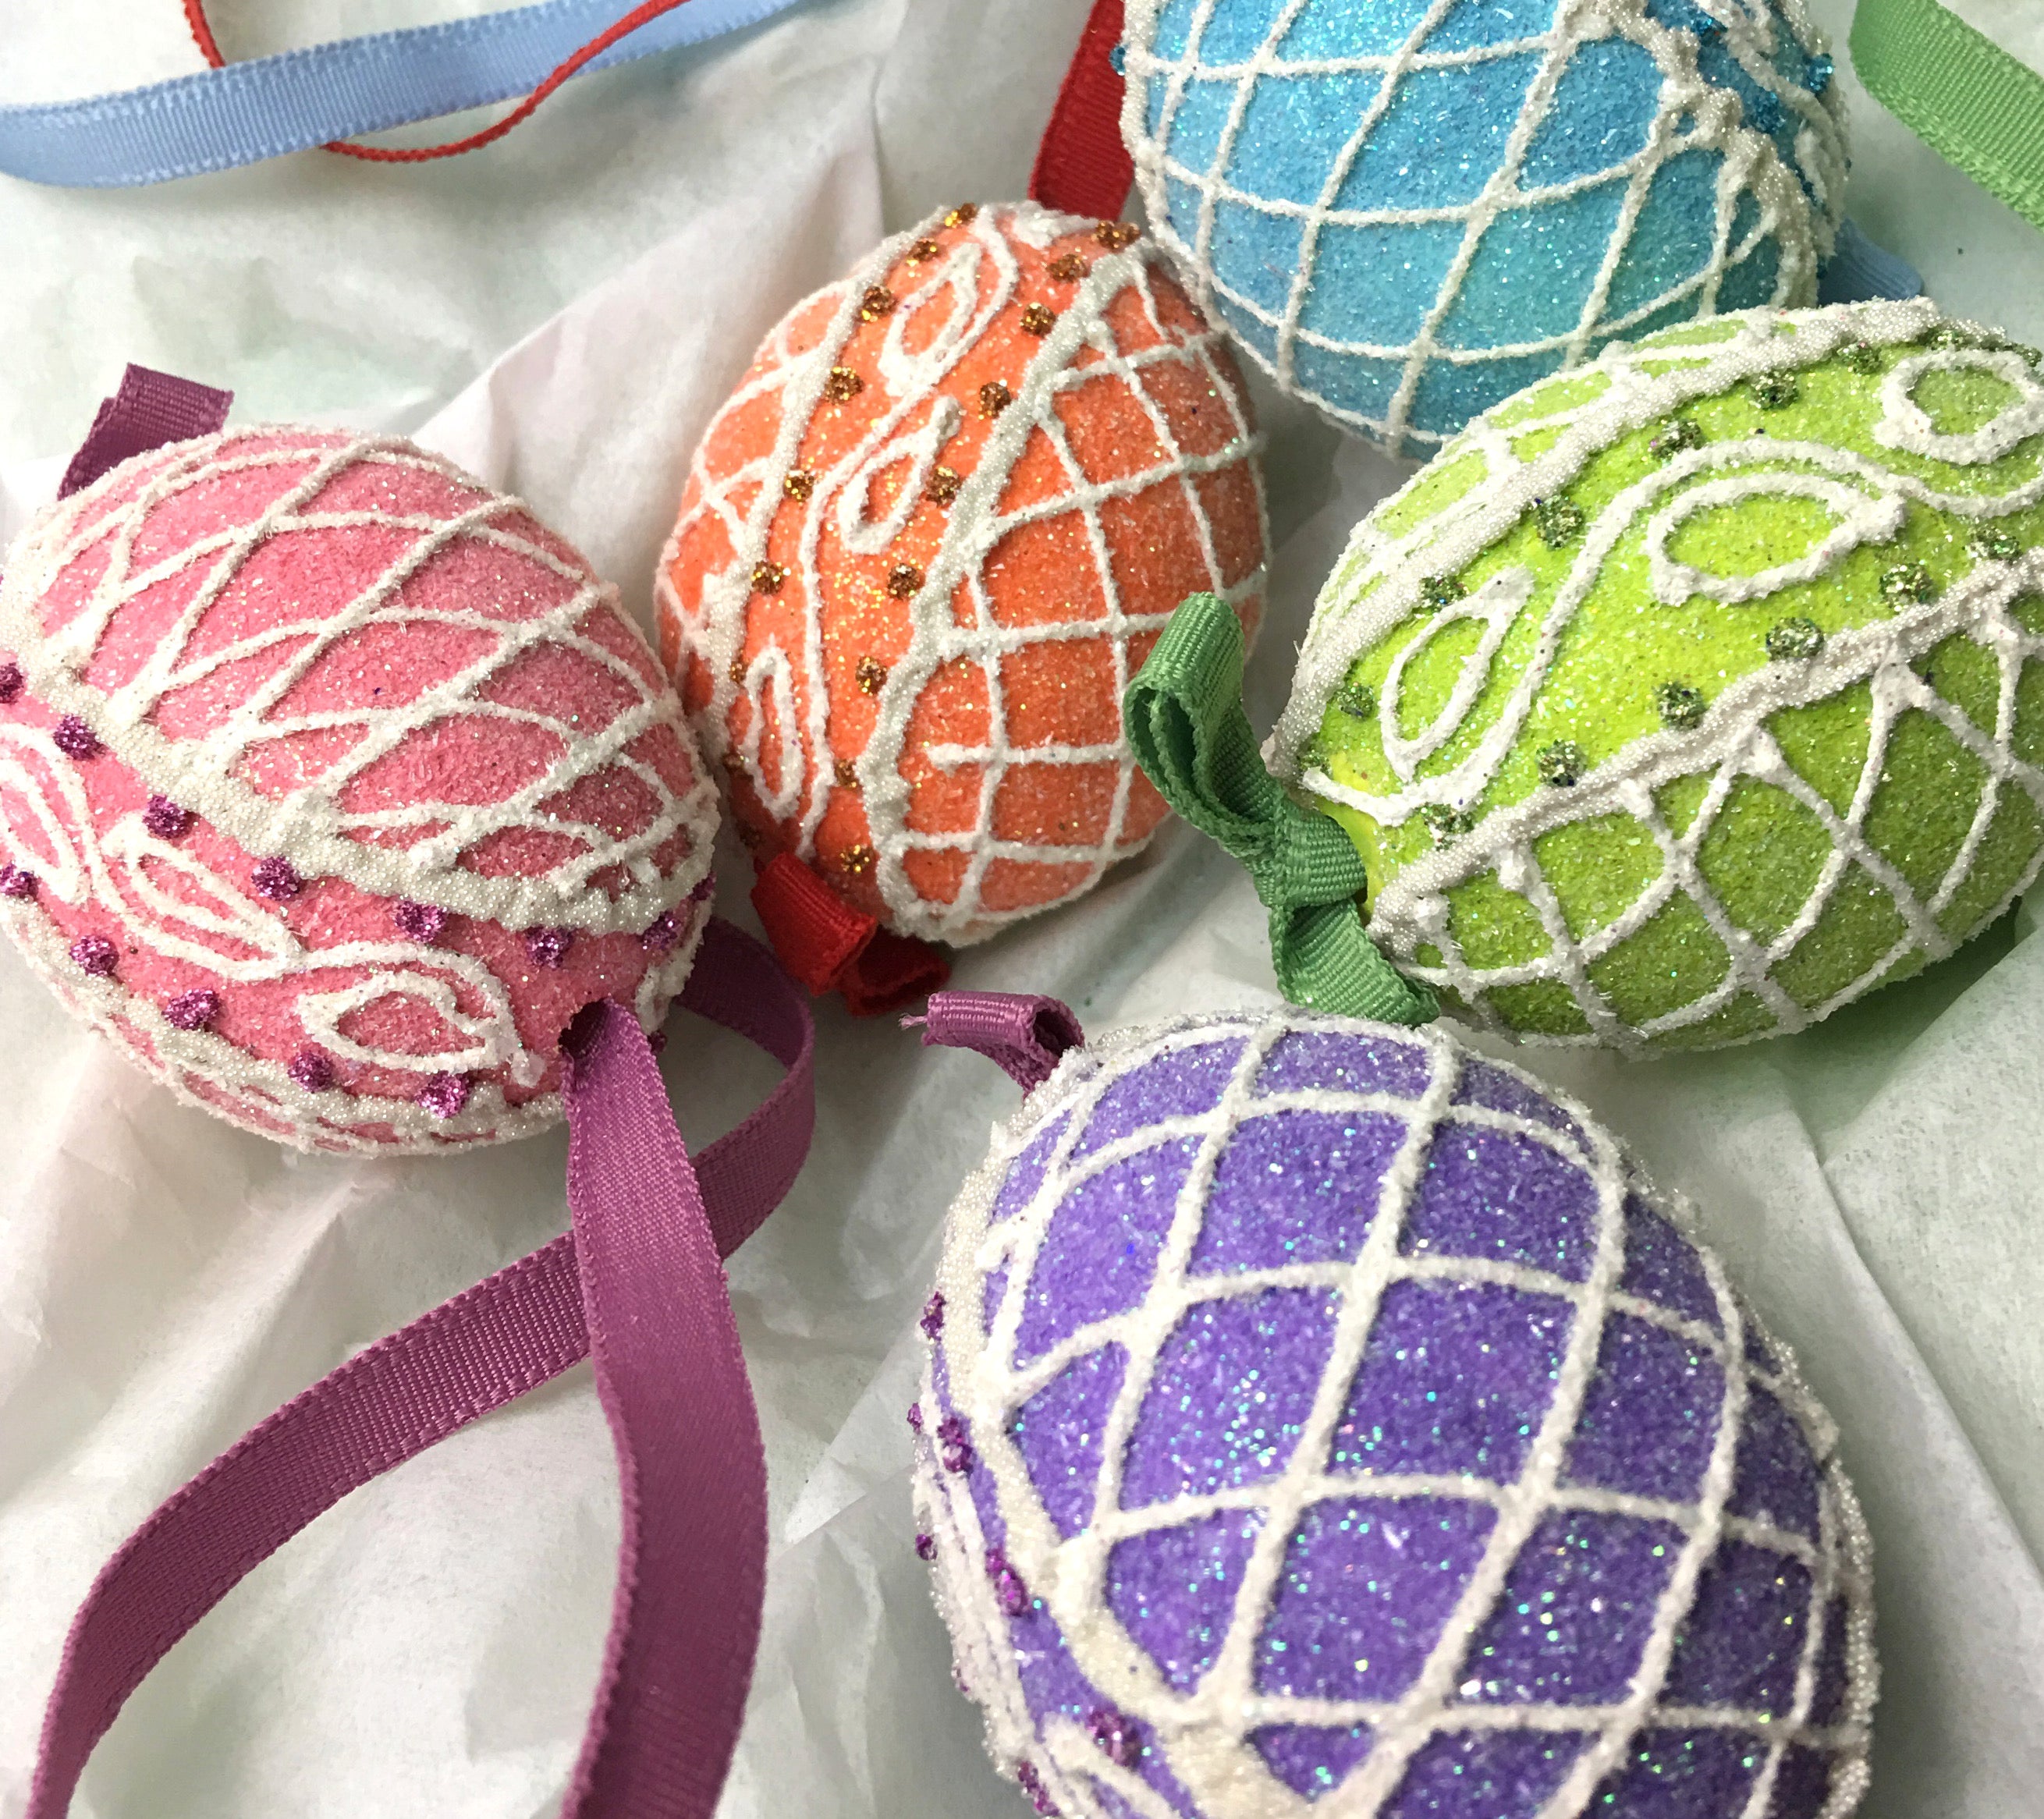 Real Egg Ornaments Made to Look Like Sugar Eggs